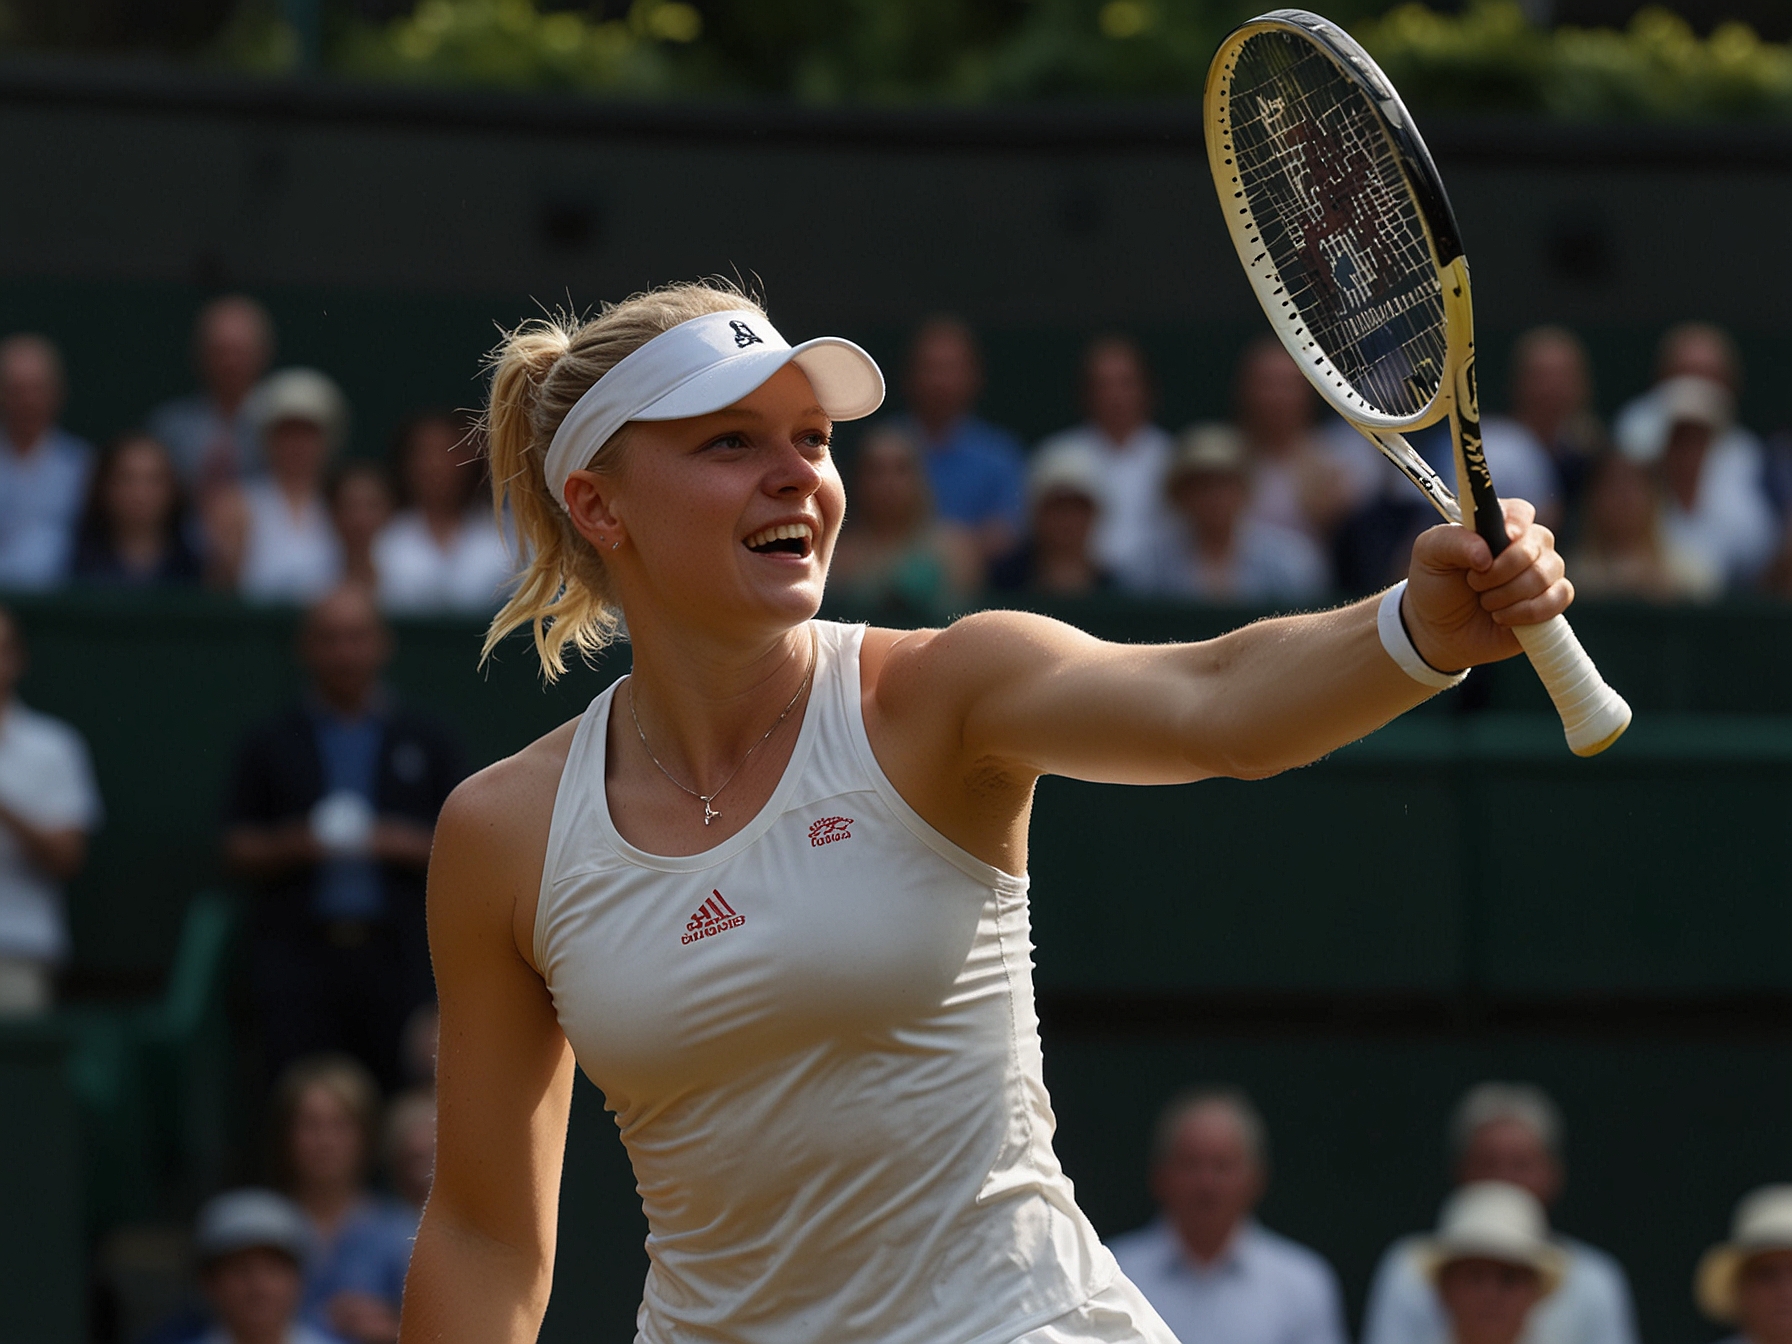 Harriet Dart celebrates after winning her first-round match at Wimbledon, showcasing her powerful serves and resilience on Court 18 despite a lengthy rain delay.